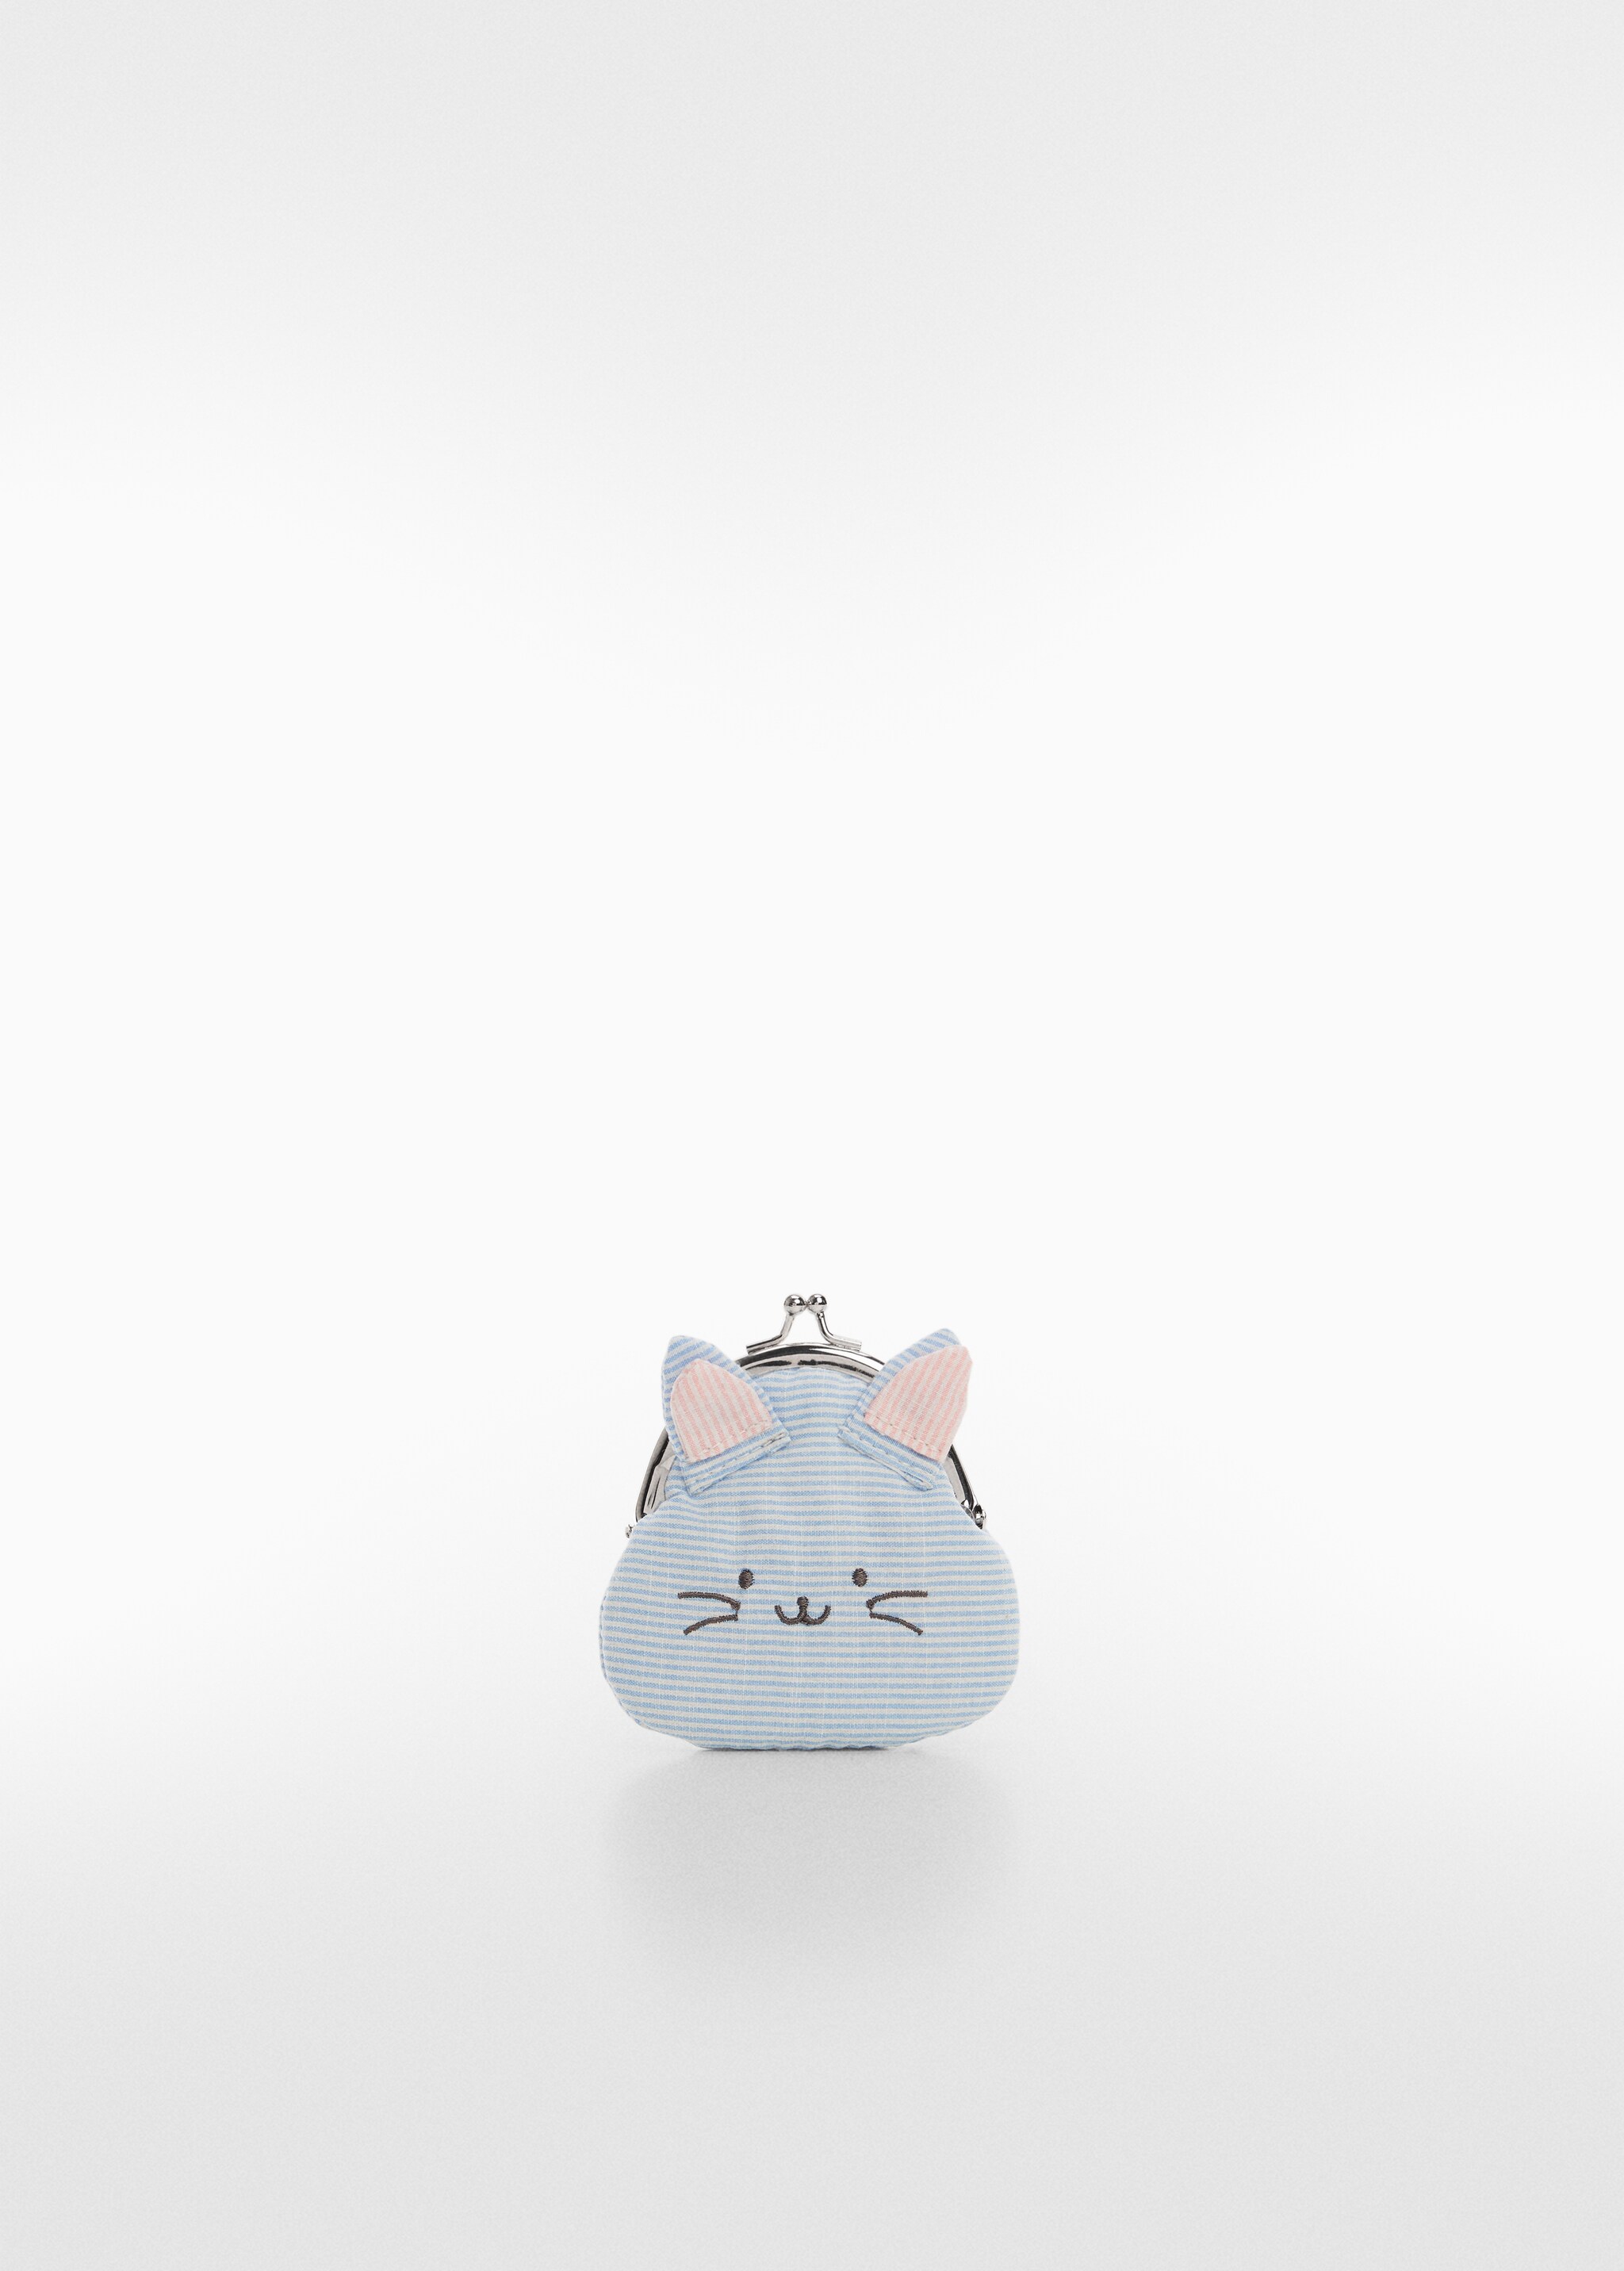 Cat purse - Article without model